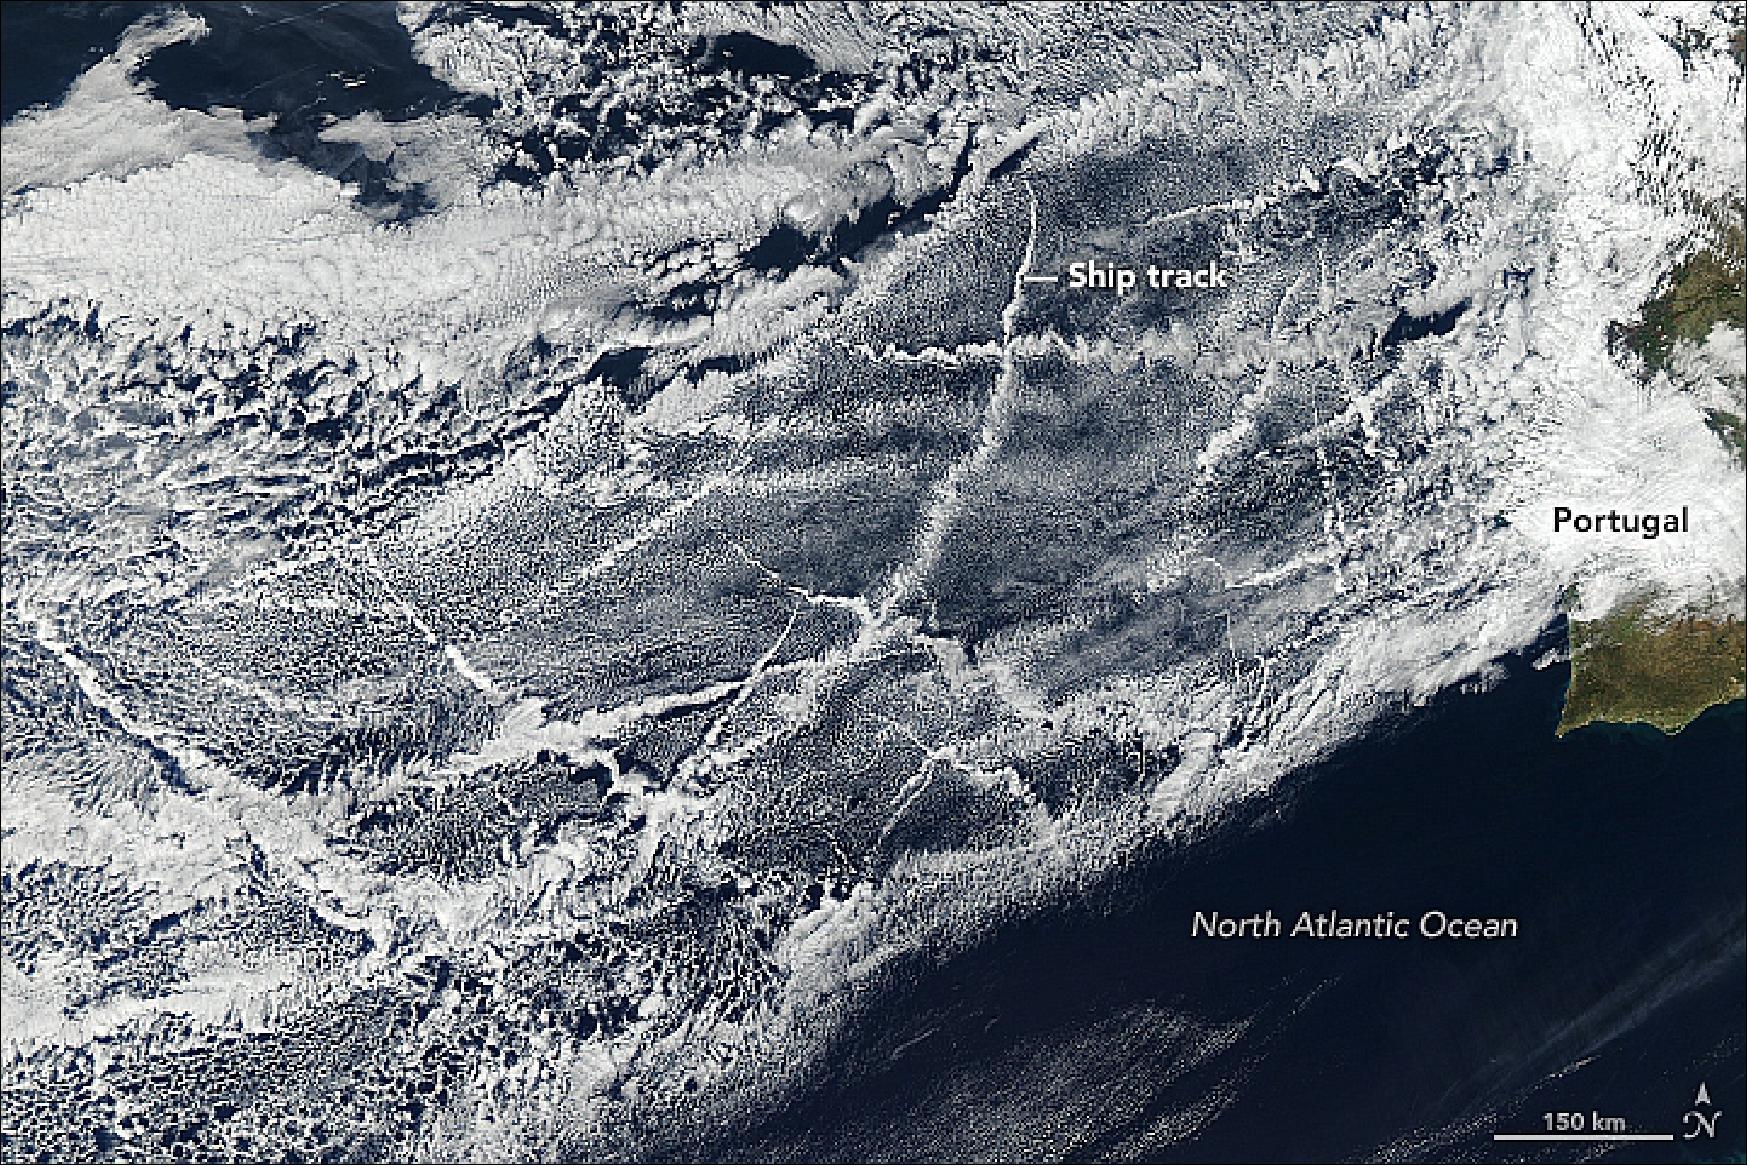 Figure 85: The MODIS instrument aboard the Aqua satellite captured this natural-color image on 16 January 2018, crisscrossing cloud trails off the coast of Portugal and Spain (image credit: NASA Earth Observatory, image by Jeff Schmaltz, LANCE/EOSDIS Rapid Response. Story by Adam Voiland)